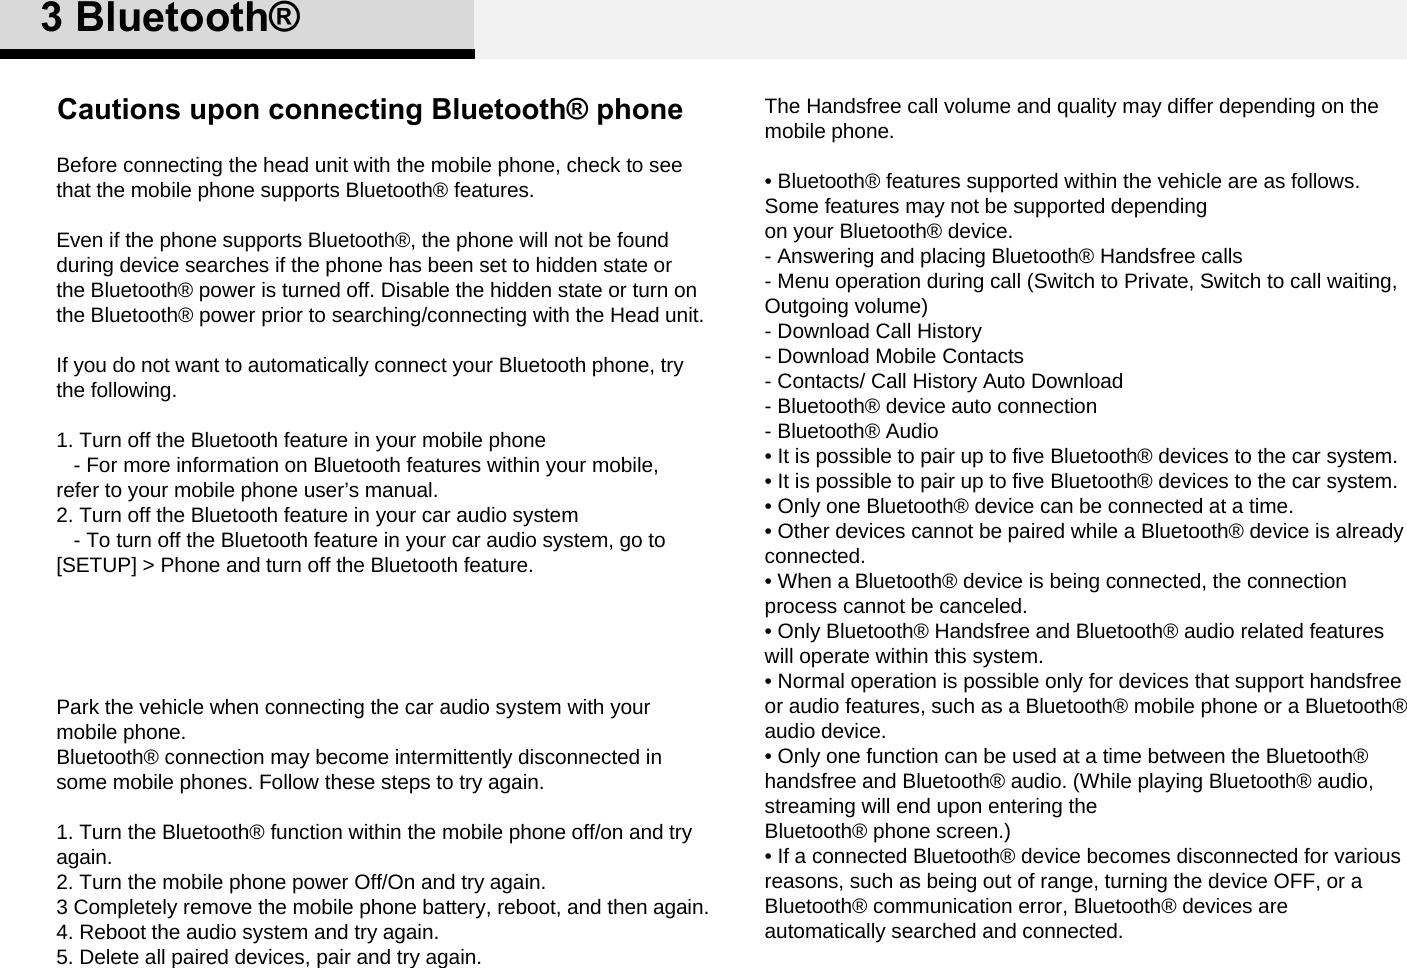 Cautions upon connecting Bluetooth® phoneBefore connecting the head unit with the mobile phone, check to see that the mobile phone supports Bluetooth® features. Even if the phone supports Bluetooth®, the phone will not be found during device searches if the phone has been set to hidden state or the Bluetooth® power is turned off. Disable the hidden state or turn on the Bluetooth® power prior to searching/connecting with the Head unit.If you do not want to automatically connect your Bluetooth phone, try the following.1. Turn off the Bluetooth feature in your mobile phone- For more information on Bluetooth features within your mobile, refer to your mobile phone user’s manual. 2. Turn off the Bluetooth feature in your car audio system- To turn off the Bluetooth feature in your car audio system, go to [SETUP] &gt; Phone and turn off the Bluetooth feature.Park the vehicle when connecting the car audio system with your mobile phone. Bluetooth® connection may become intermittently disconnected in some mobile phones. Follow these steps to try again. 1. Turn the Bluetooth® function within the mobile phone off/on and try again.2. Turn the mobile phone power Off/On and try again.3 Completely remove the mobile phone battery, reboot, and then again.4. Reboot the audio system and try again.5. Delete all paired devices, pair and try again.The Handsfree call volume and quality may differ depending on the mobile phone. • Bluetooth® features supported within the vehicle are as follows. Some features may not be supported dependingon your Bluetooth® device. - Answering and placing Bluetooth® Handsfree calls- Menu operation during call (Switch to Private, Switch to call waiting, Outgoing volume)- Download Call History-Download Mobile Contacts- Contacts/ Call History Auto Download- Bluetooth® device auto connection- Bluetooth® Audio • It is possible to pair up to five Bluetooth® devices to the car system.• It is possible to pair up to five Bluetooth® devices to the car system.• Only one Bluetooth® device can be connected at a time.• Other devices cannot be paired while a Bluetooth® device is already connected.• When a Bluetooth® device is being connected, the connection process cannot be canceled.• Only Bluetooth® Handsfree and Bluetooth® audio related features will operate within this system.• Normal operation is possible only for devices that support handsfree or audio features, such as a Bluetooth® mobile phone or a Bluetooth® audio device.• Only one function can be used at a time between the Bluetooth® handsfree and Bluetooth® audio. (While playing Bluetooth® audio, streaming will end upon entering theBluetooth® phone screen.) • If a connected Bluetooth® device becomes disconnected for various reasons, such as being out of range, turning the device OFF, or a Bluetooth® communication error, Bluetooth® devices are automatically searched and connected.3 Bluetooth®